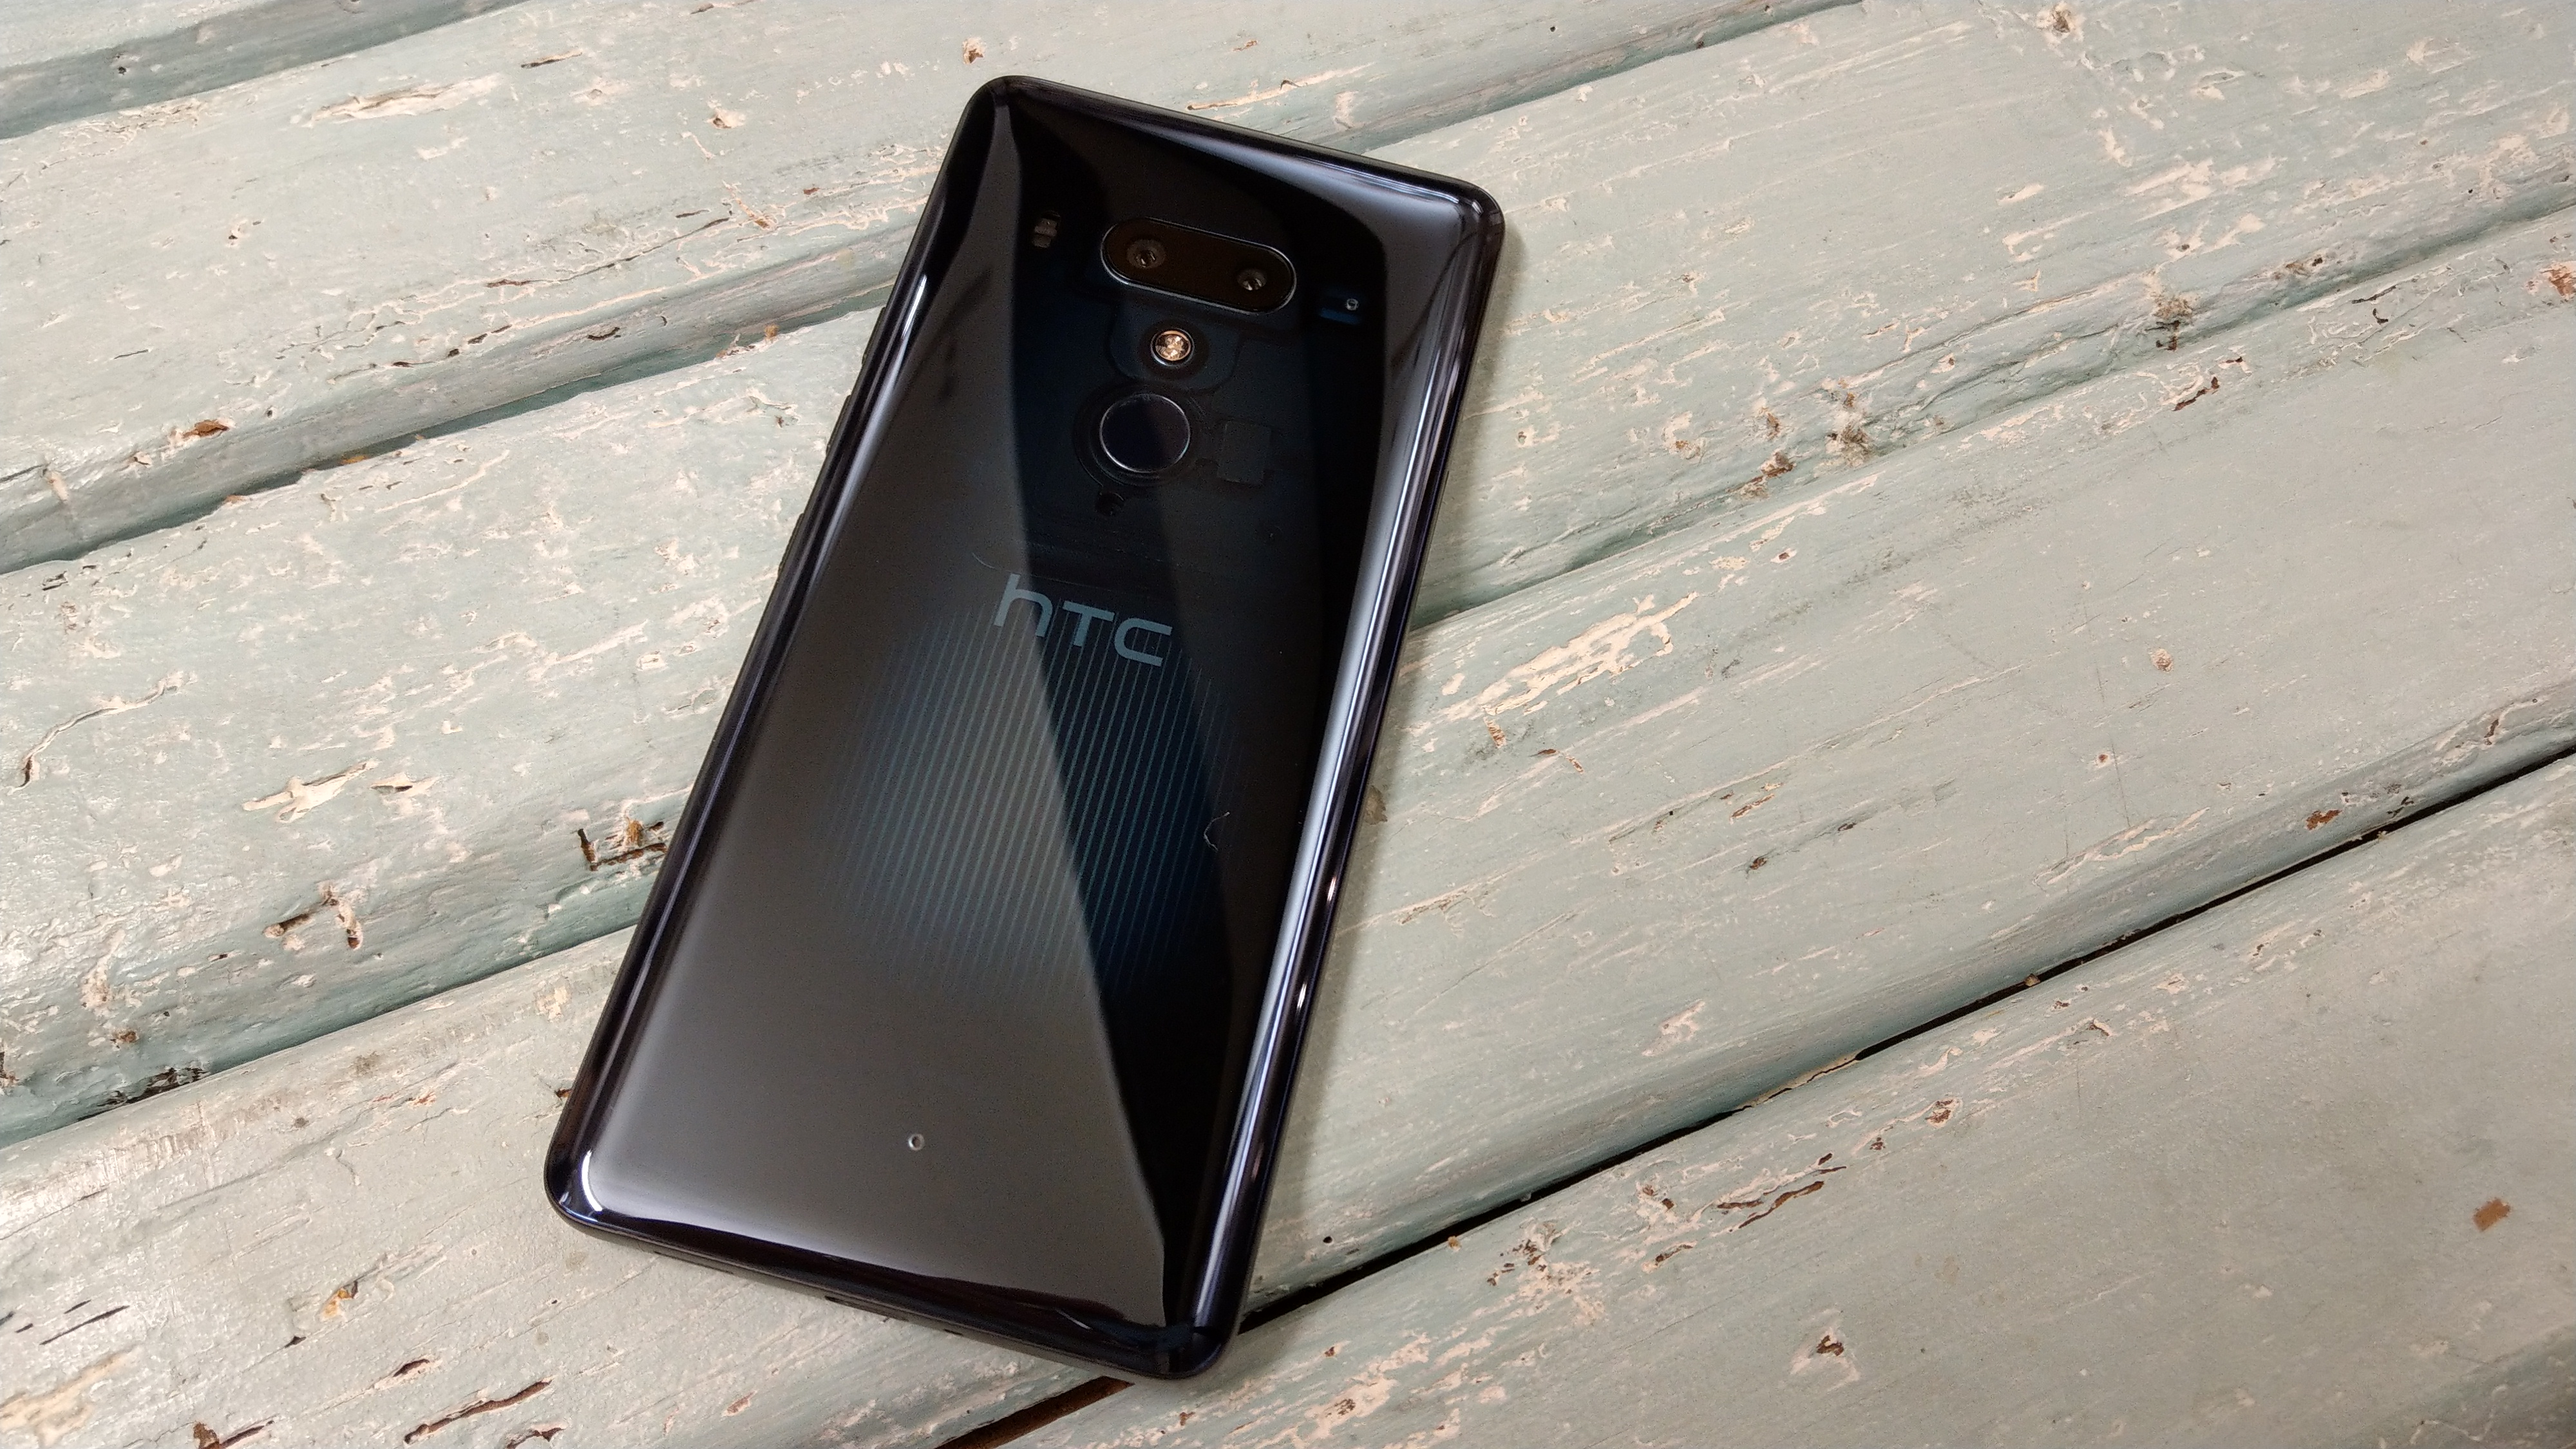 HTC U12 Plus: Everything You Need to Know About HTC's New Phone